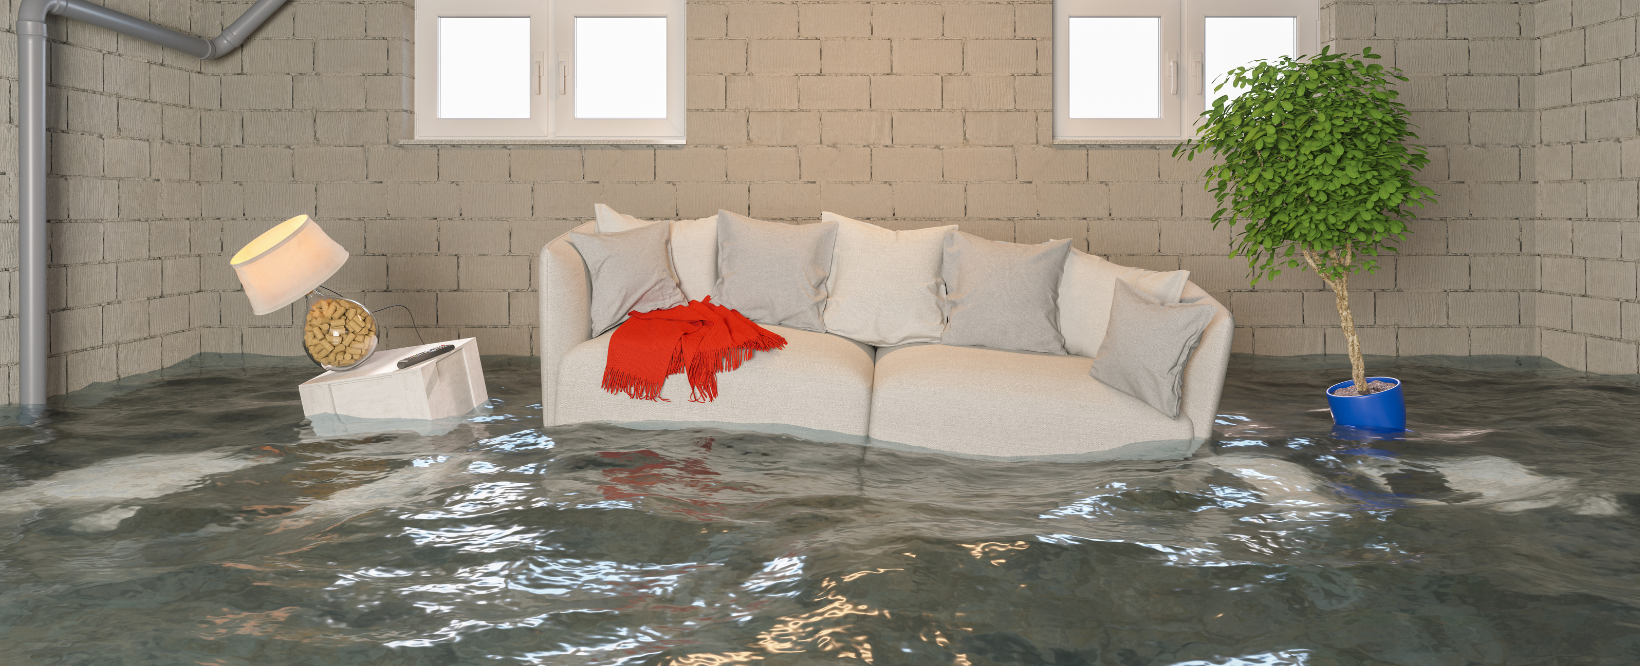 The Necessity of Professional Contents Cleaning After Water Damage in Louisiana